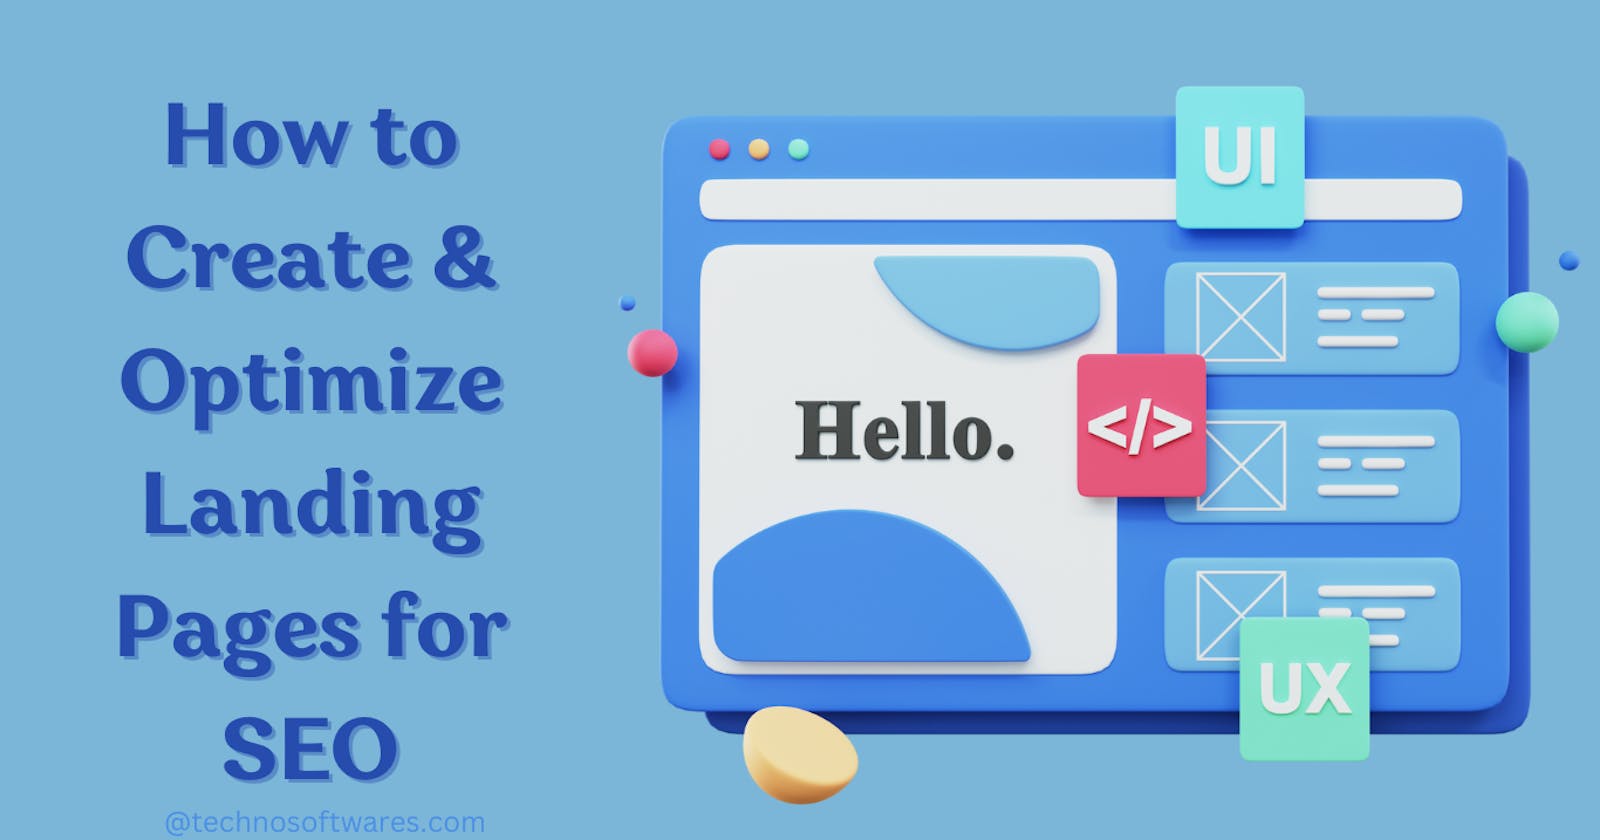 How to Create & Optimize Landing Pages for SEO